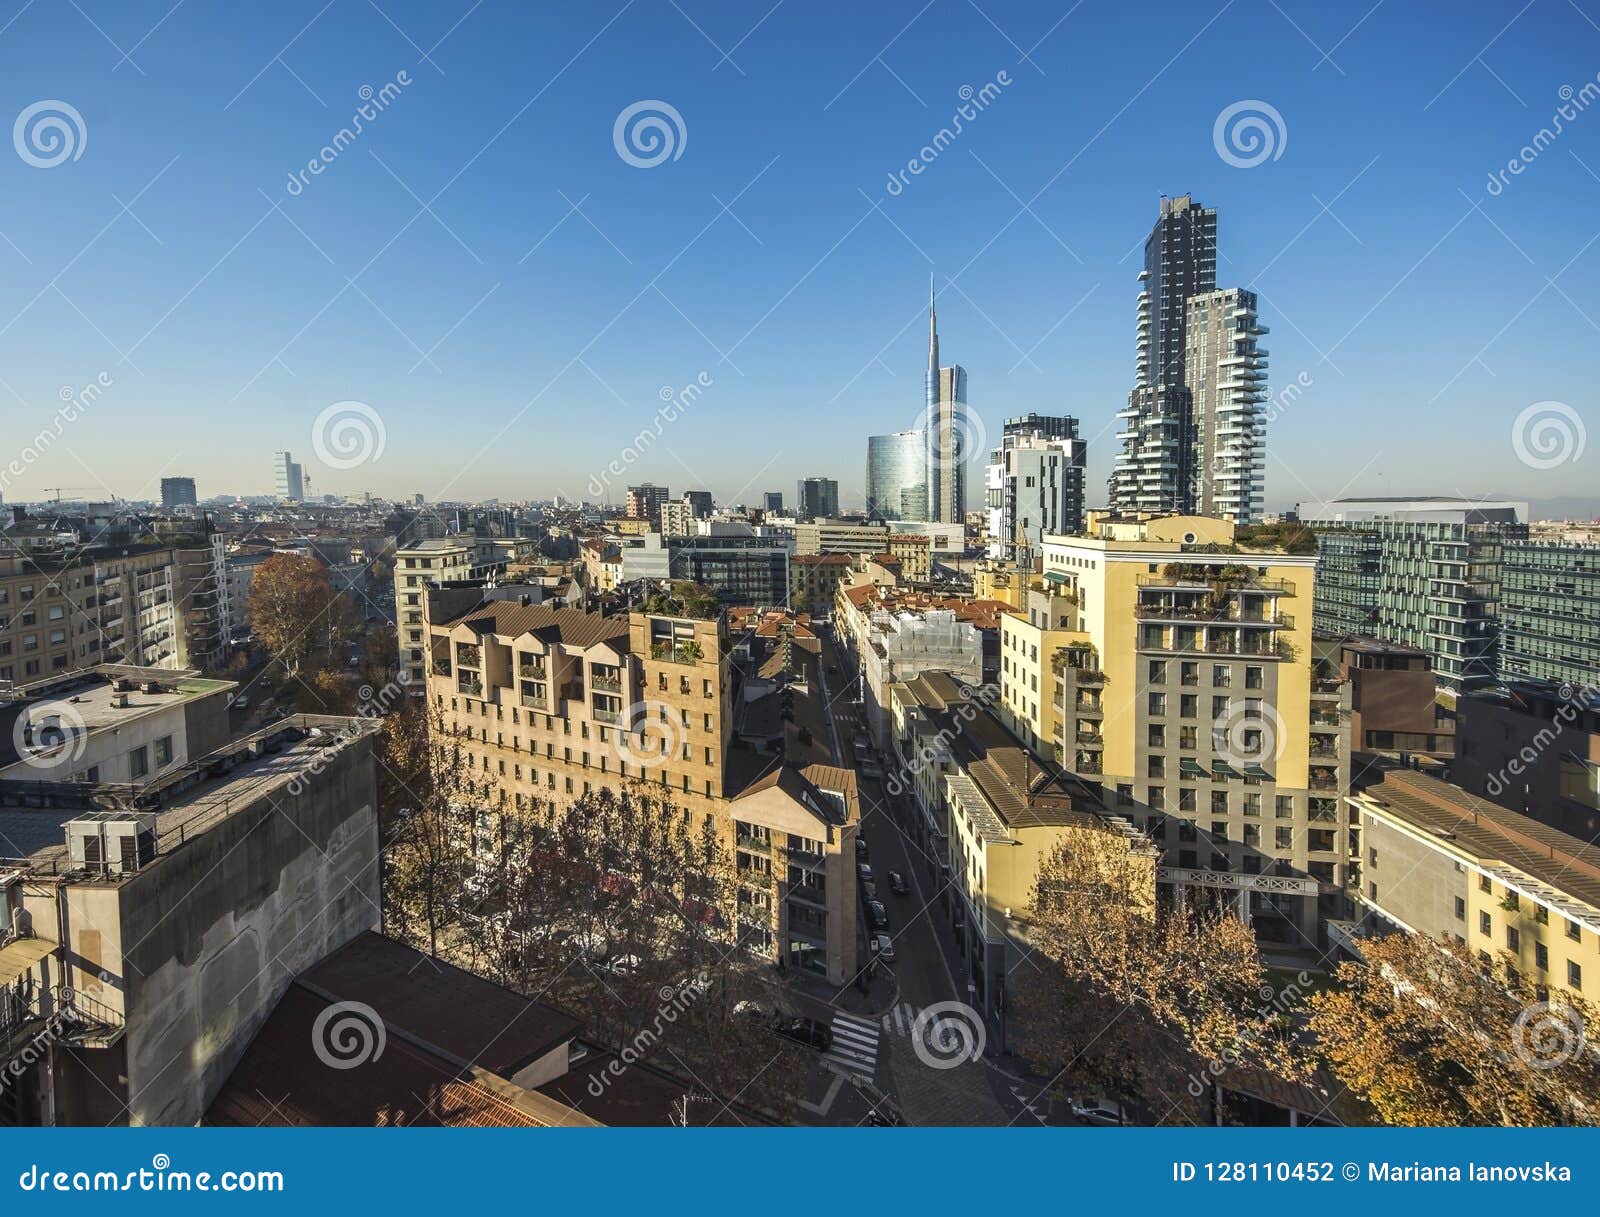 milan skyline with modern skyscrapers in porto nuovo business district, italy